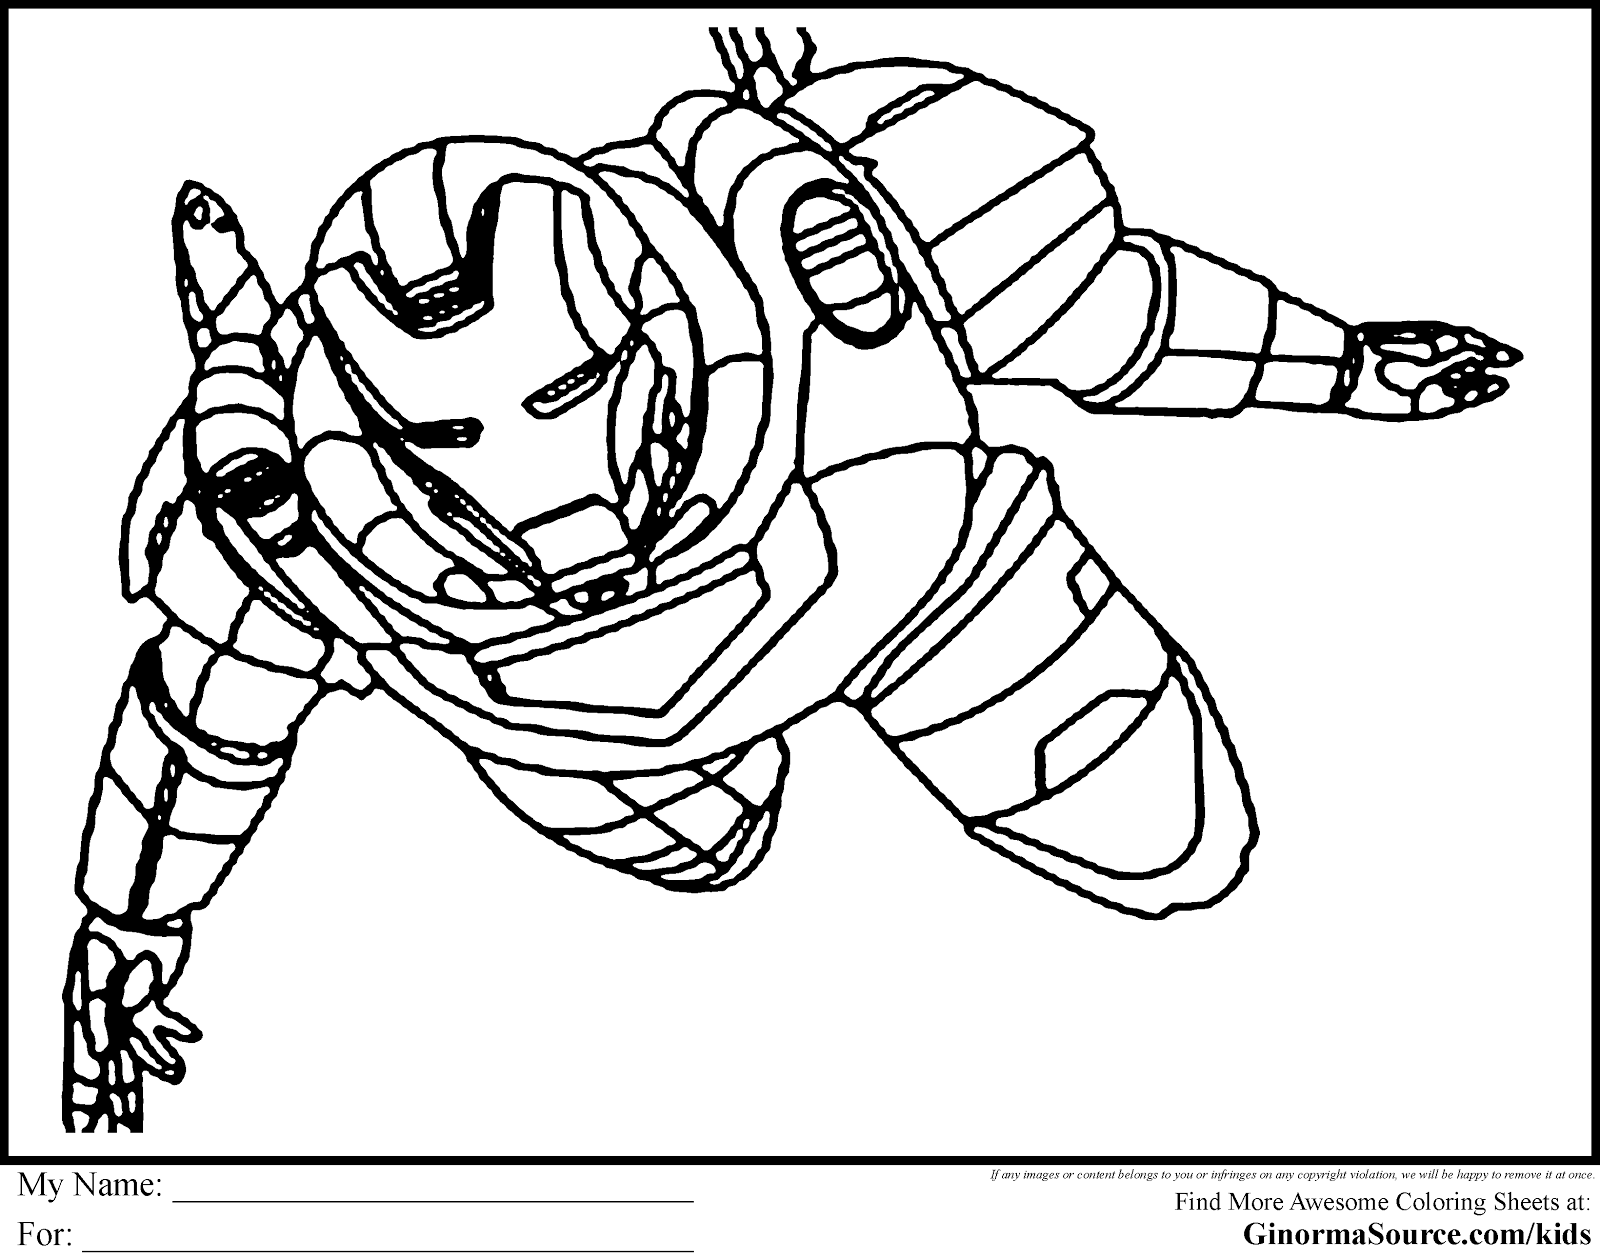 Avengers #23 (Superheroes) – Printable coloring pages